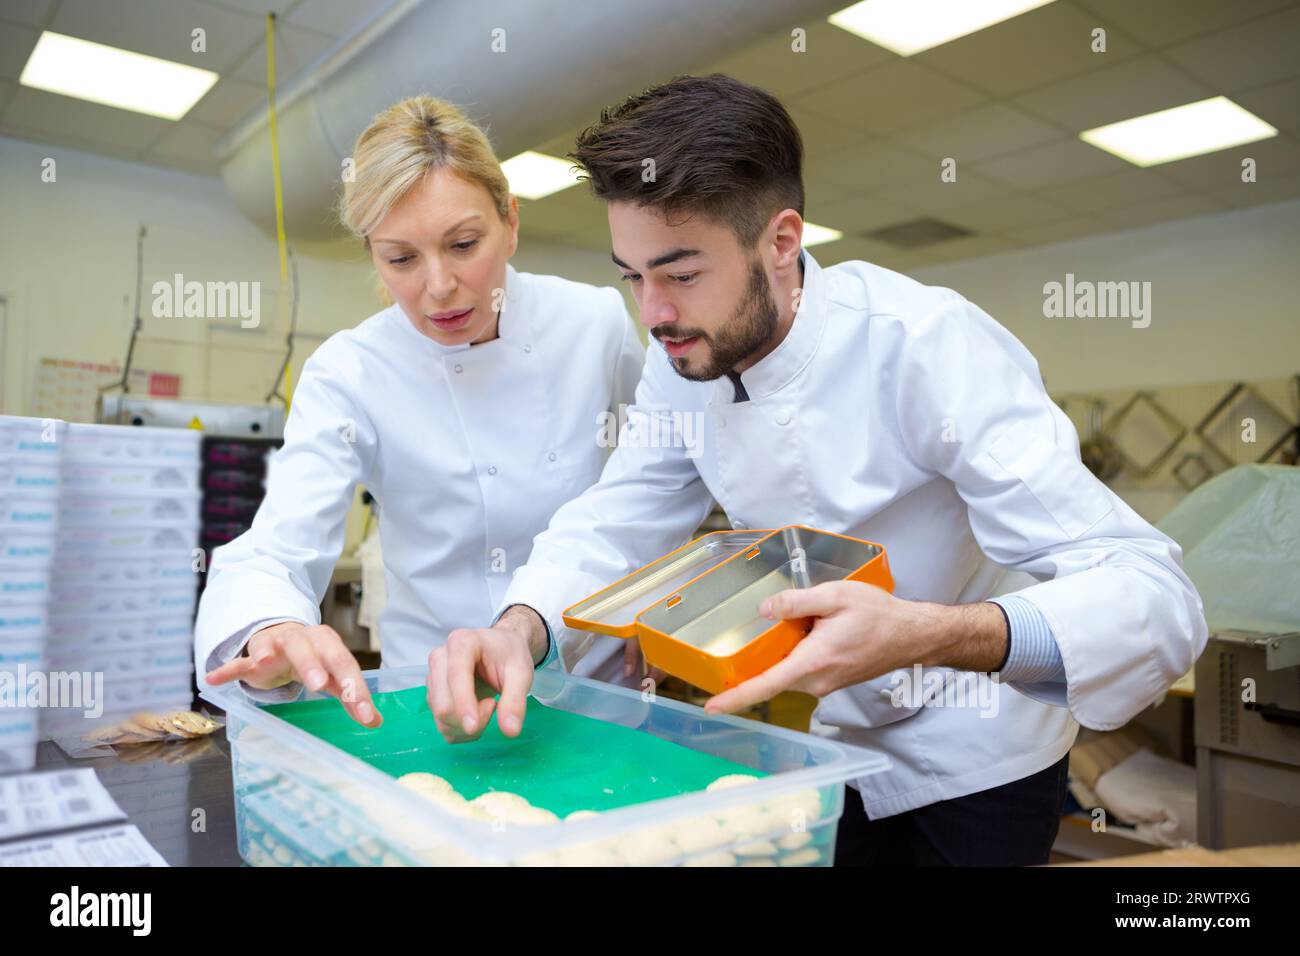 chefs choosing ingredients in professional kitchen Stock Photo